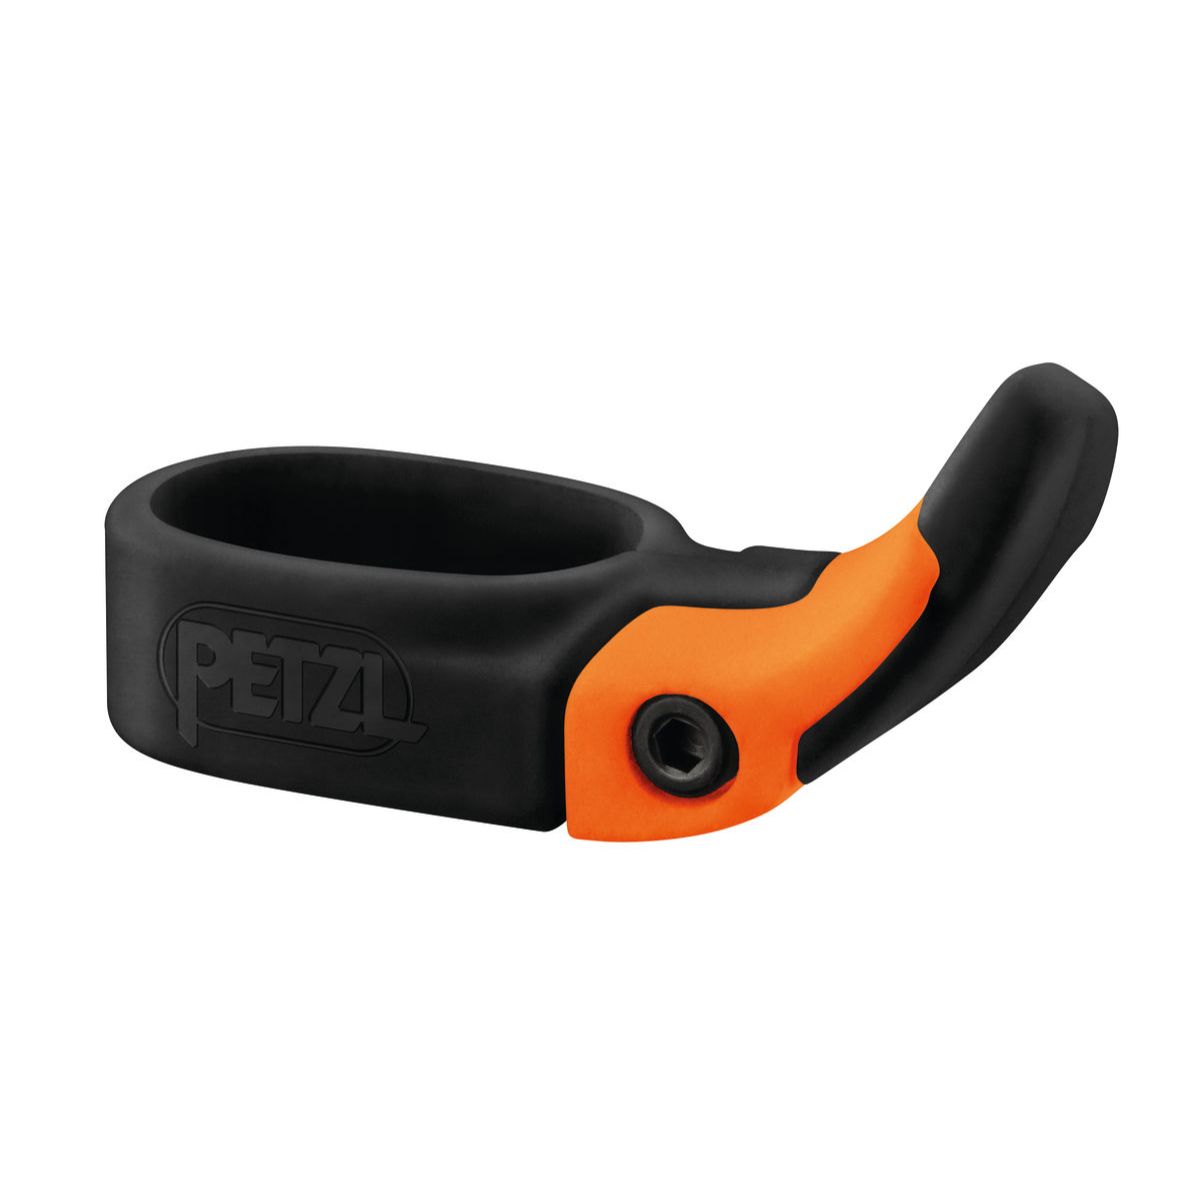 Petzl Trigrest trigger for summit ice axes in black and orange